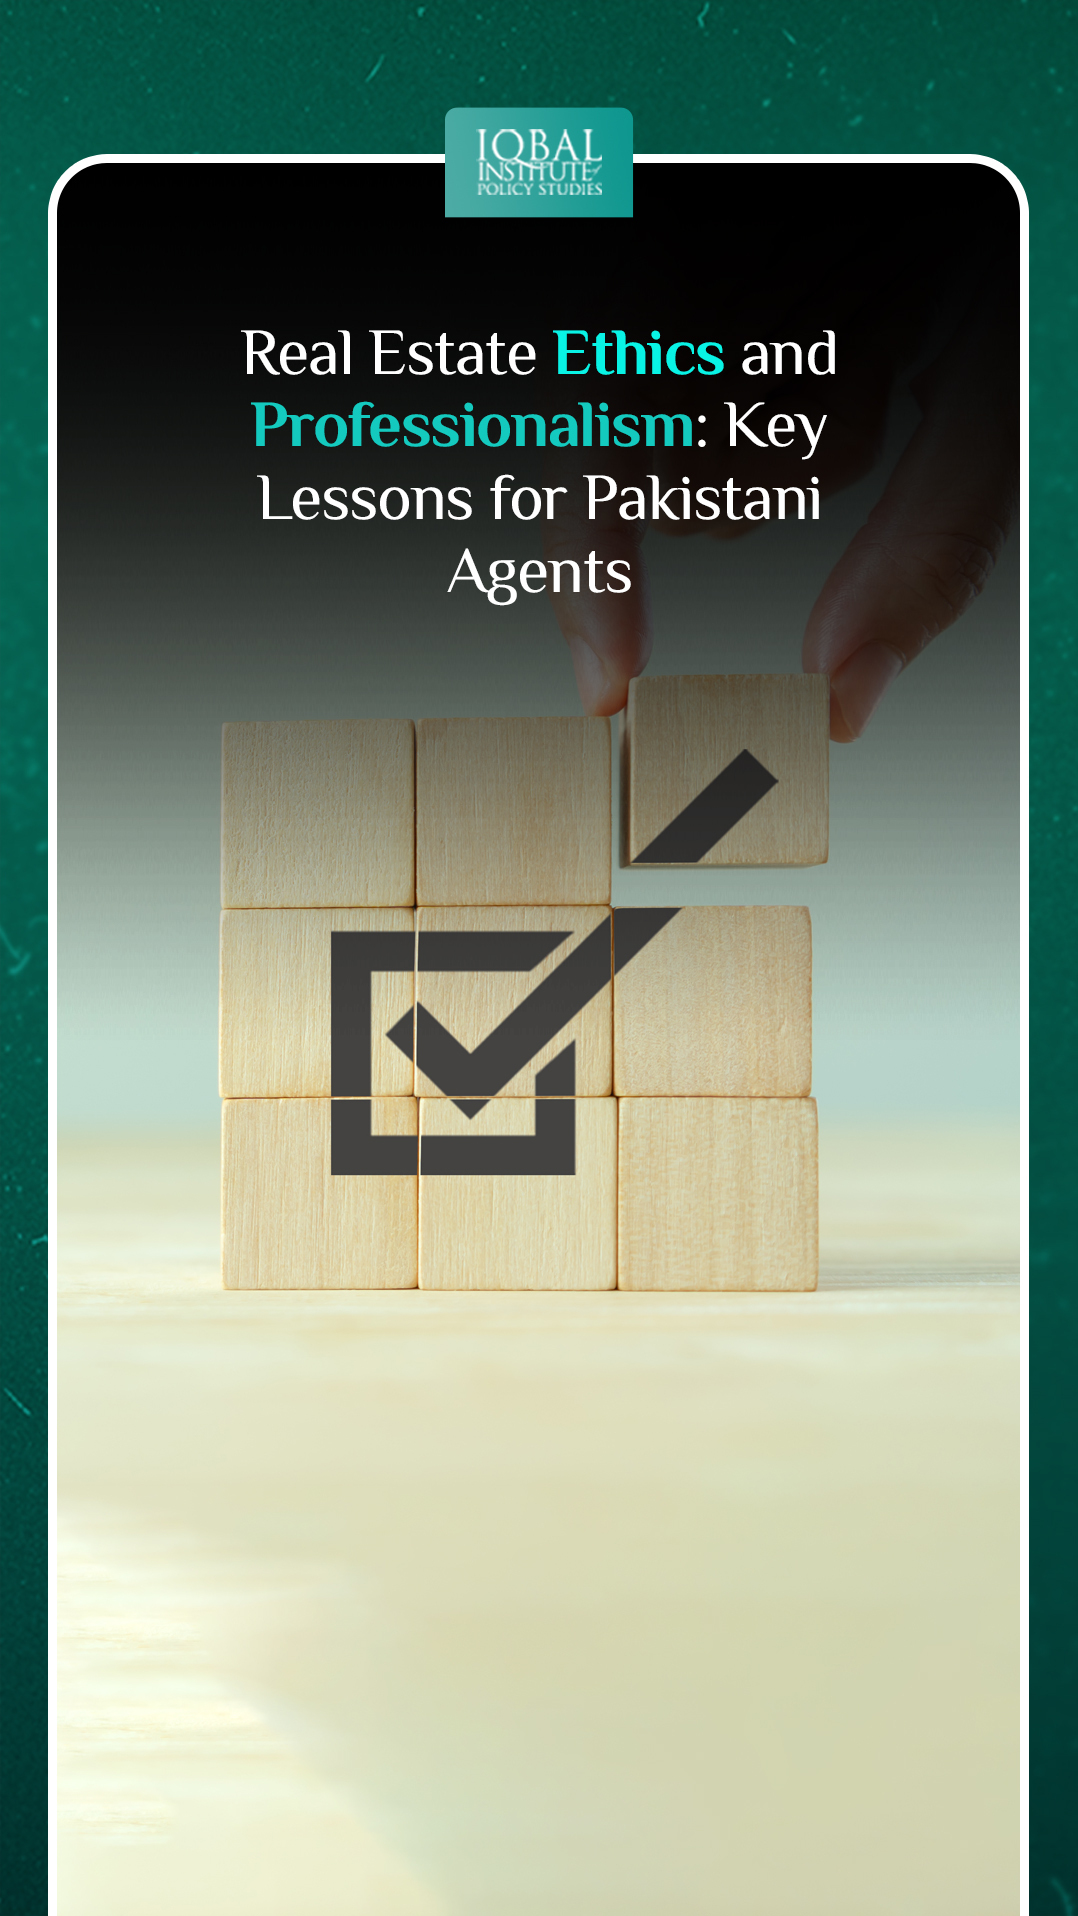 Real Estate Ethics and Professionalism: Key Lessons for Pakistani Agents